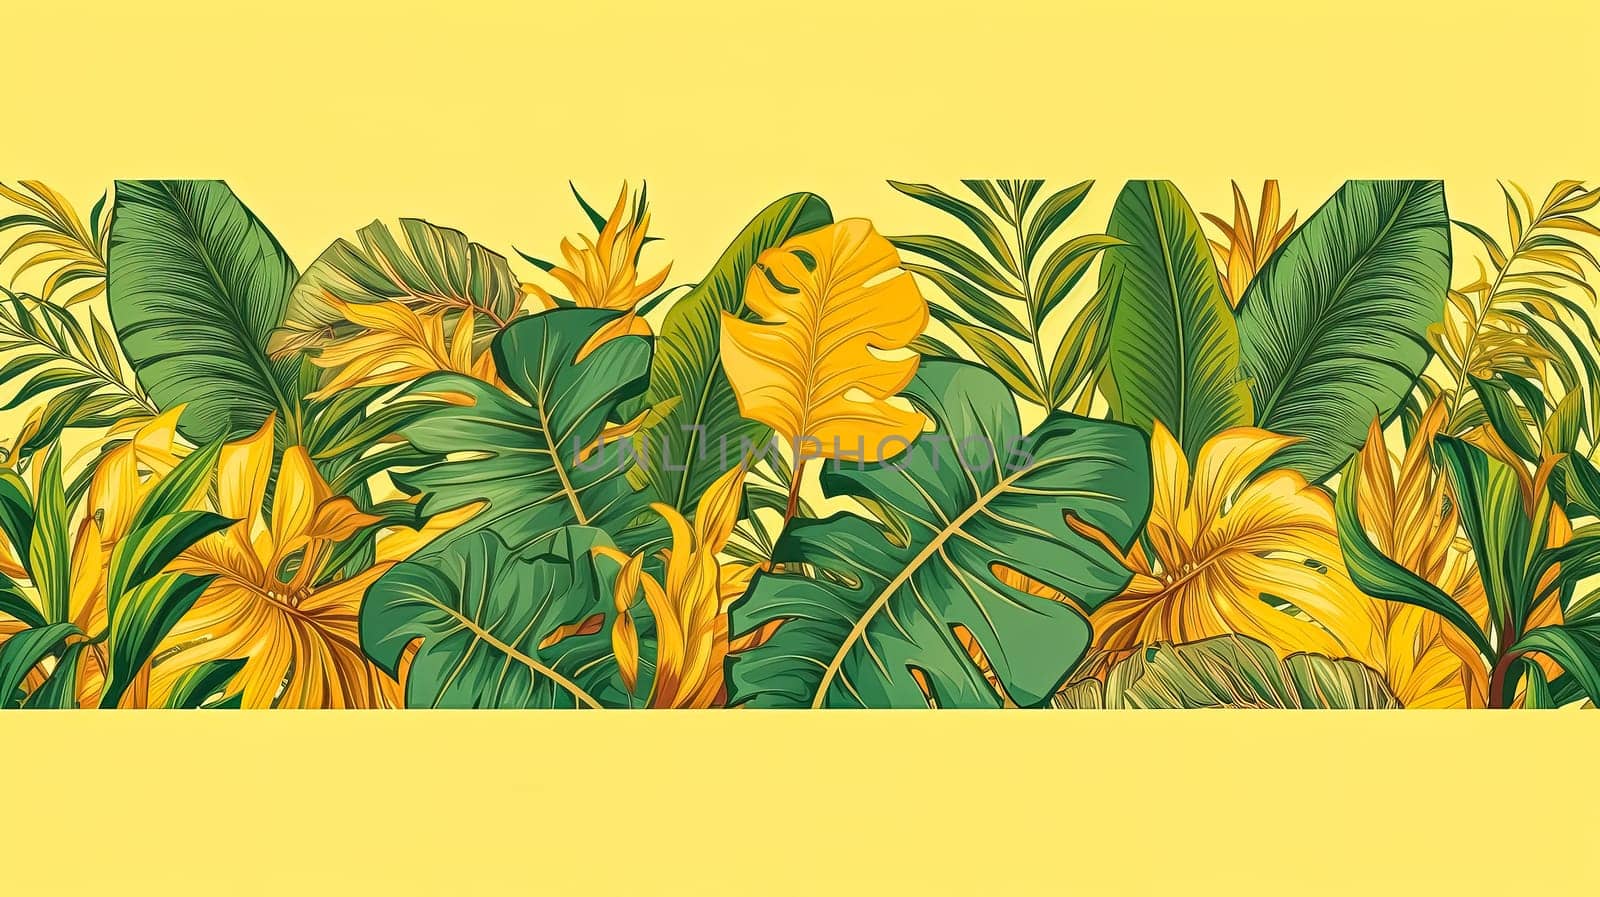 Horizontal banners featuring tropical leaves on a sunny yellow backdrop. by Alla_Morozova93